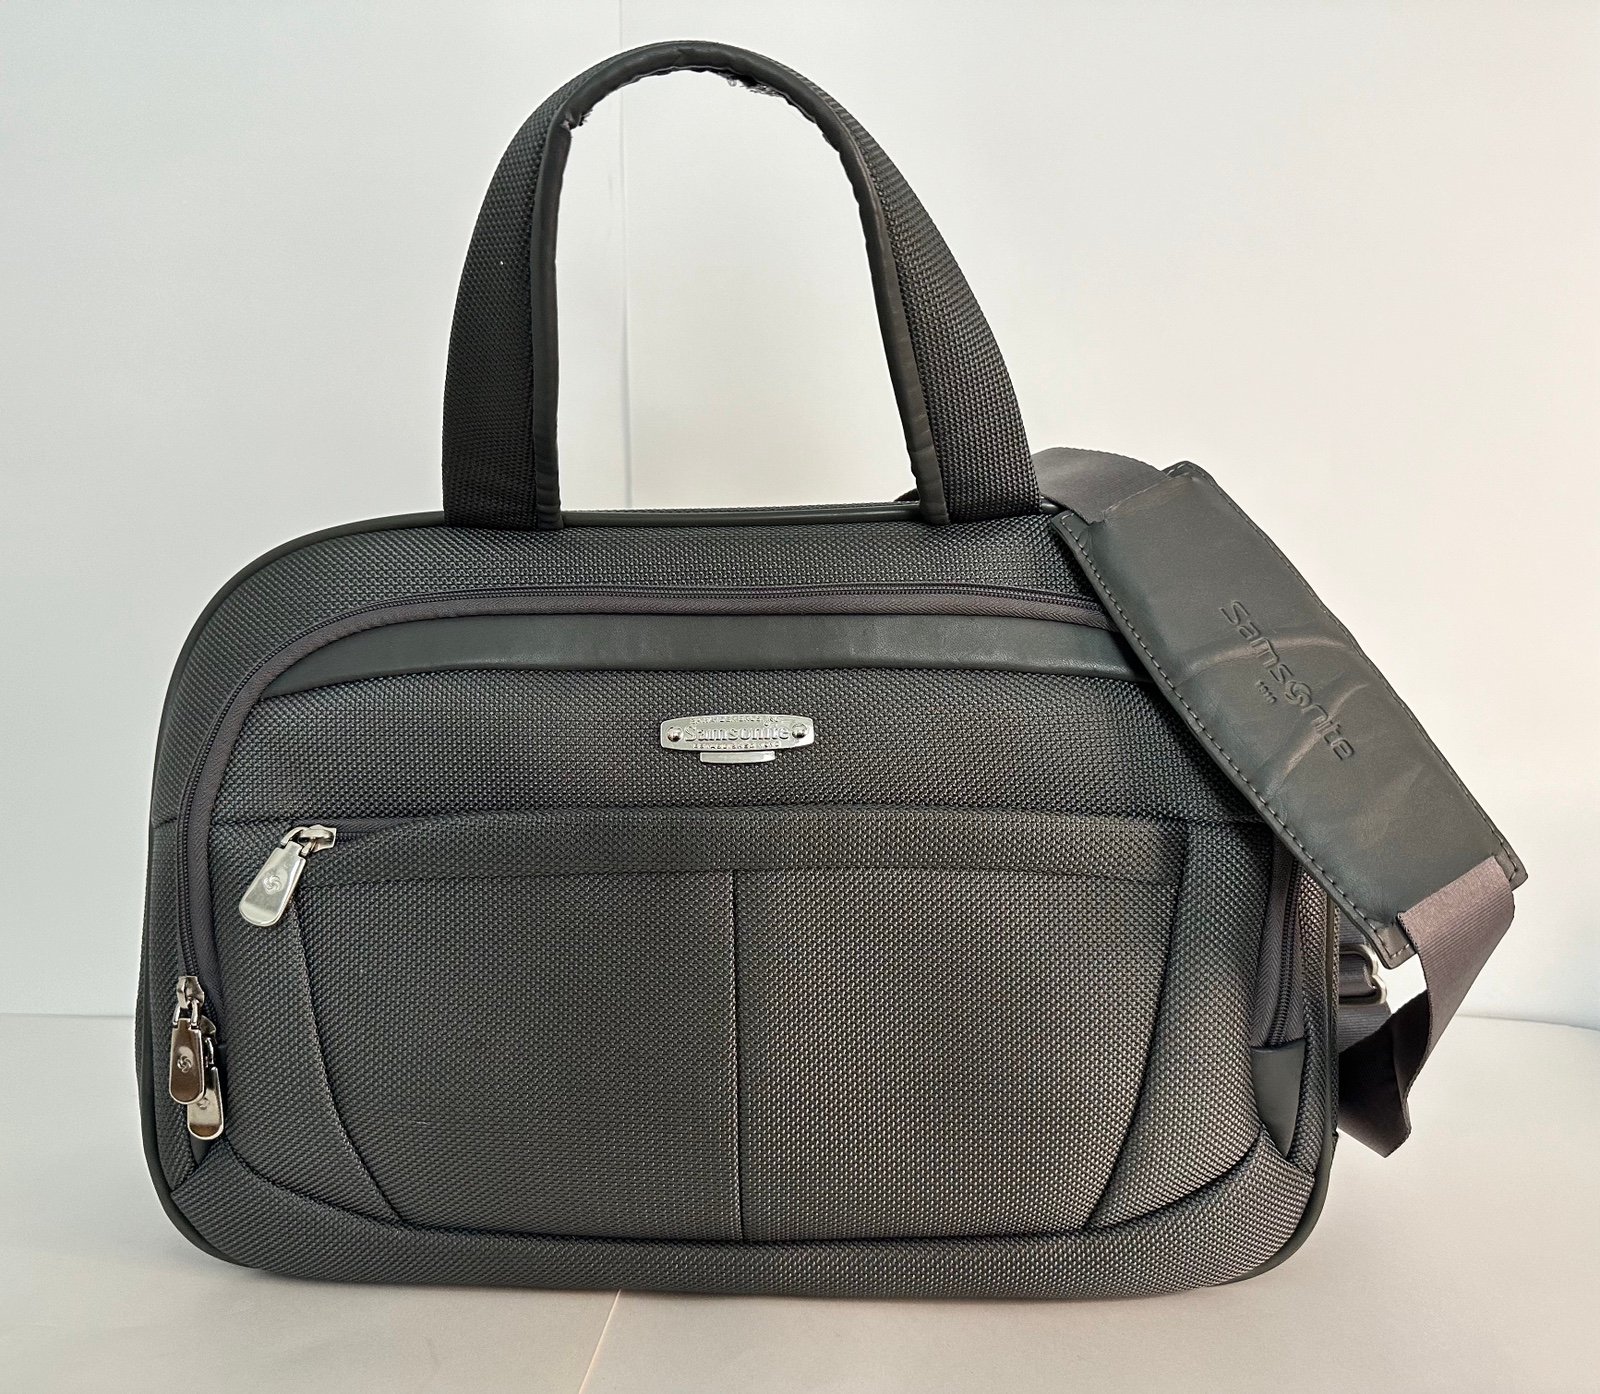 Samsonite Carry On Shoulder Bag Travel Duffel Luggage Gray Centennial Collection bPgy3yw23